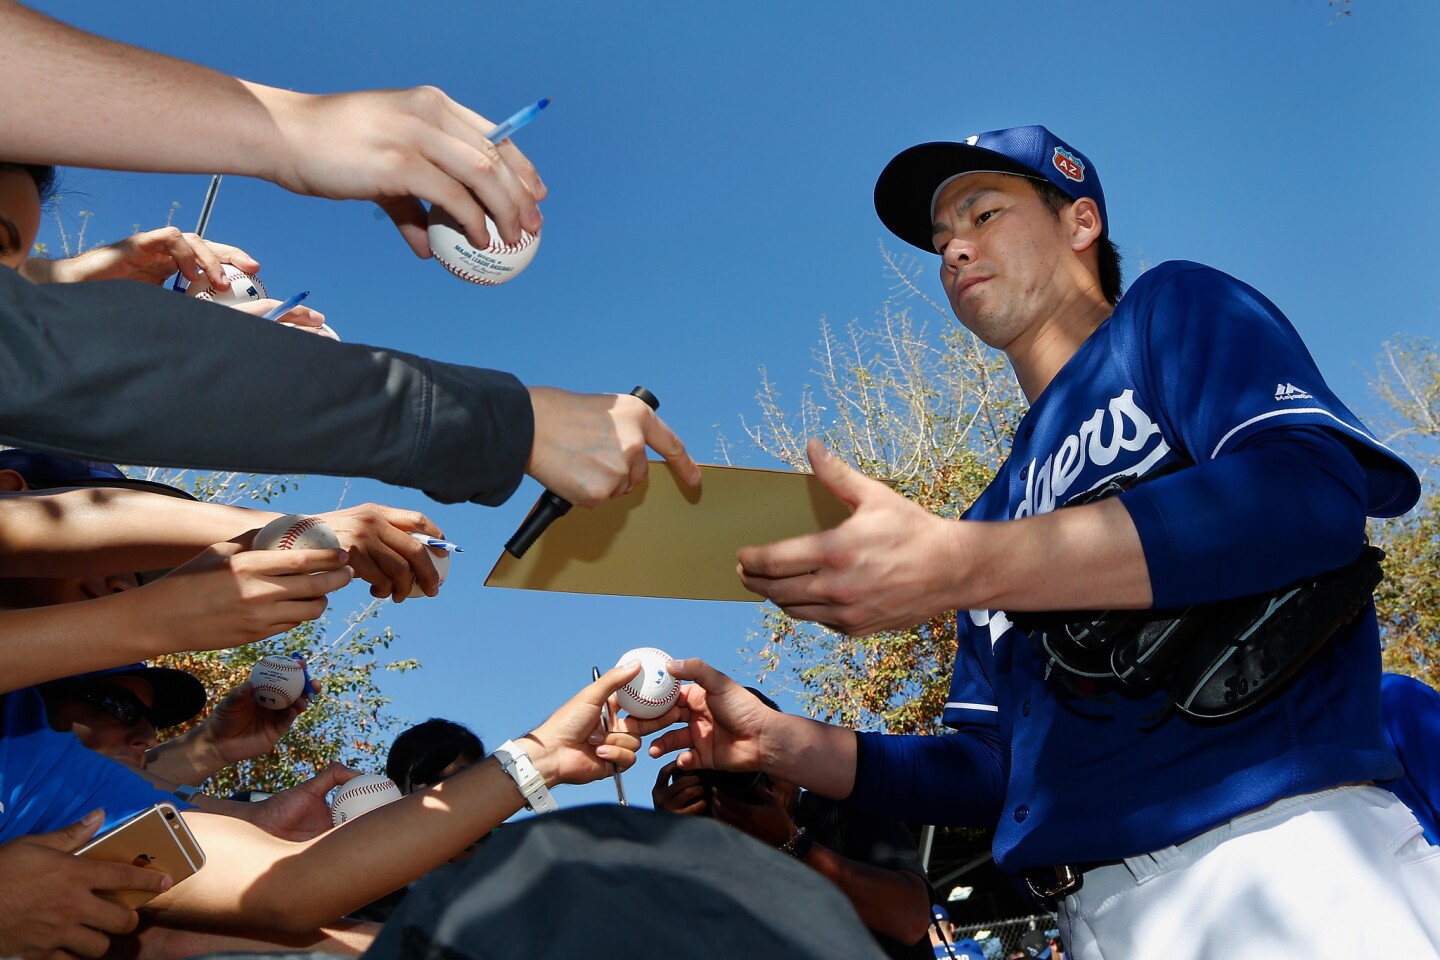 GLENDALE, AZ - FEBRUARY 20: Starting pitcher Julio Urias #78 of the Los Angeles Dodgers participates in a spring training workout at Camelback Ranch on February 20, 2016 in Glendale, Arizona. (Photo by Christian Petersen/Getty Images) ** OUTS - ELSENT, FPG, CM - OUTS * NM, PH, VA if sourced by CT, LA or MoD **